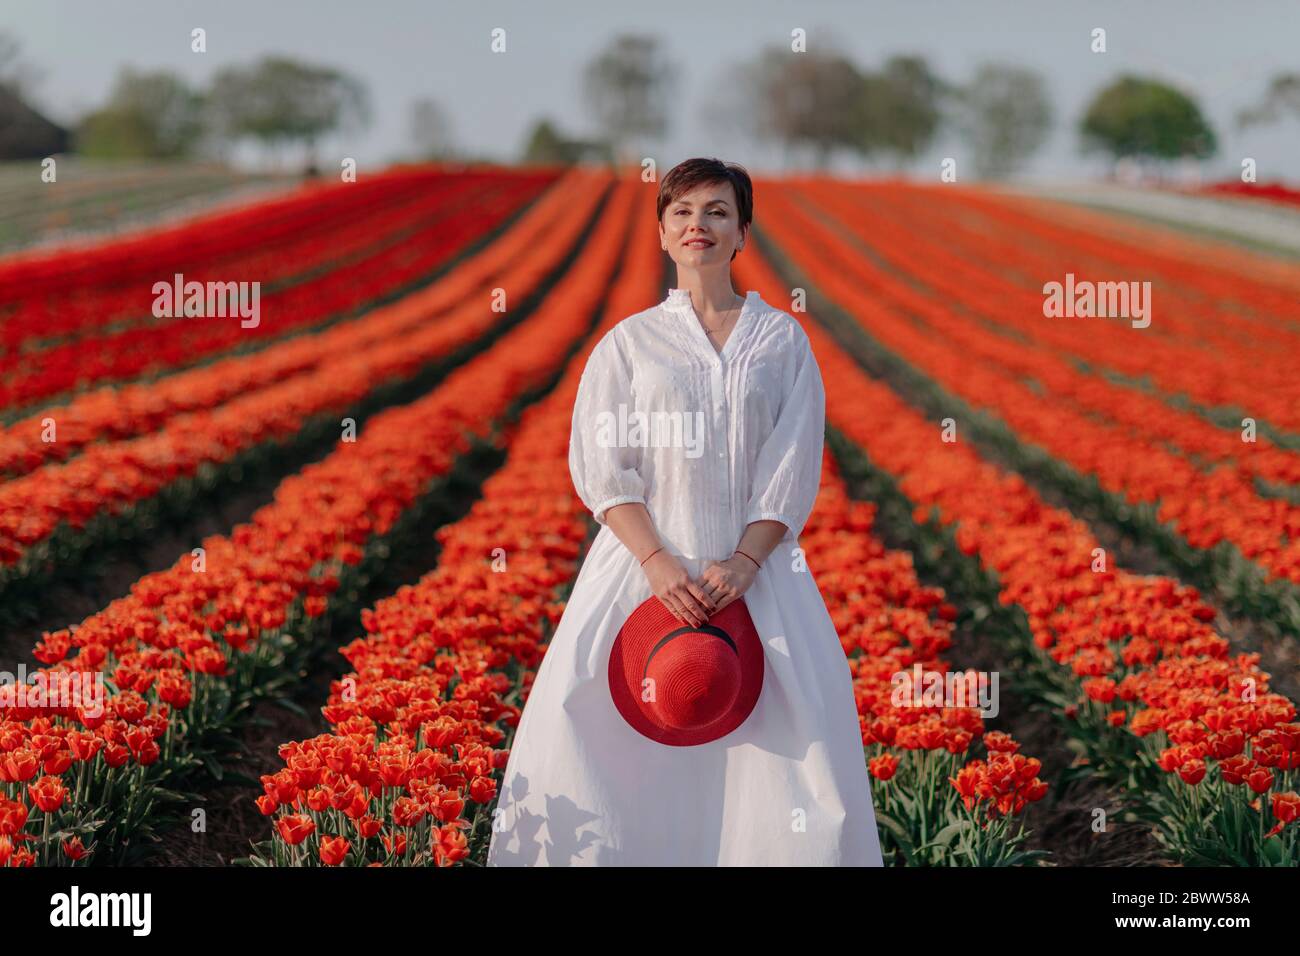 Portrait of smiling woman dressed in white standing in front of tulip field Stock Photo